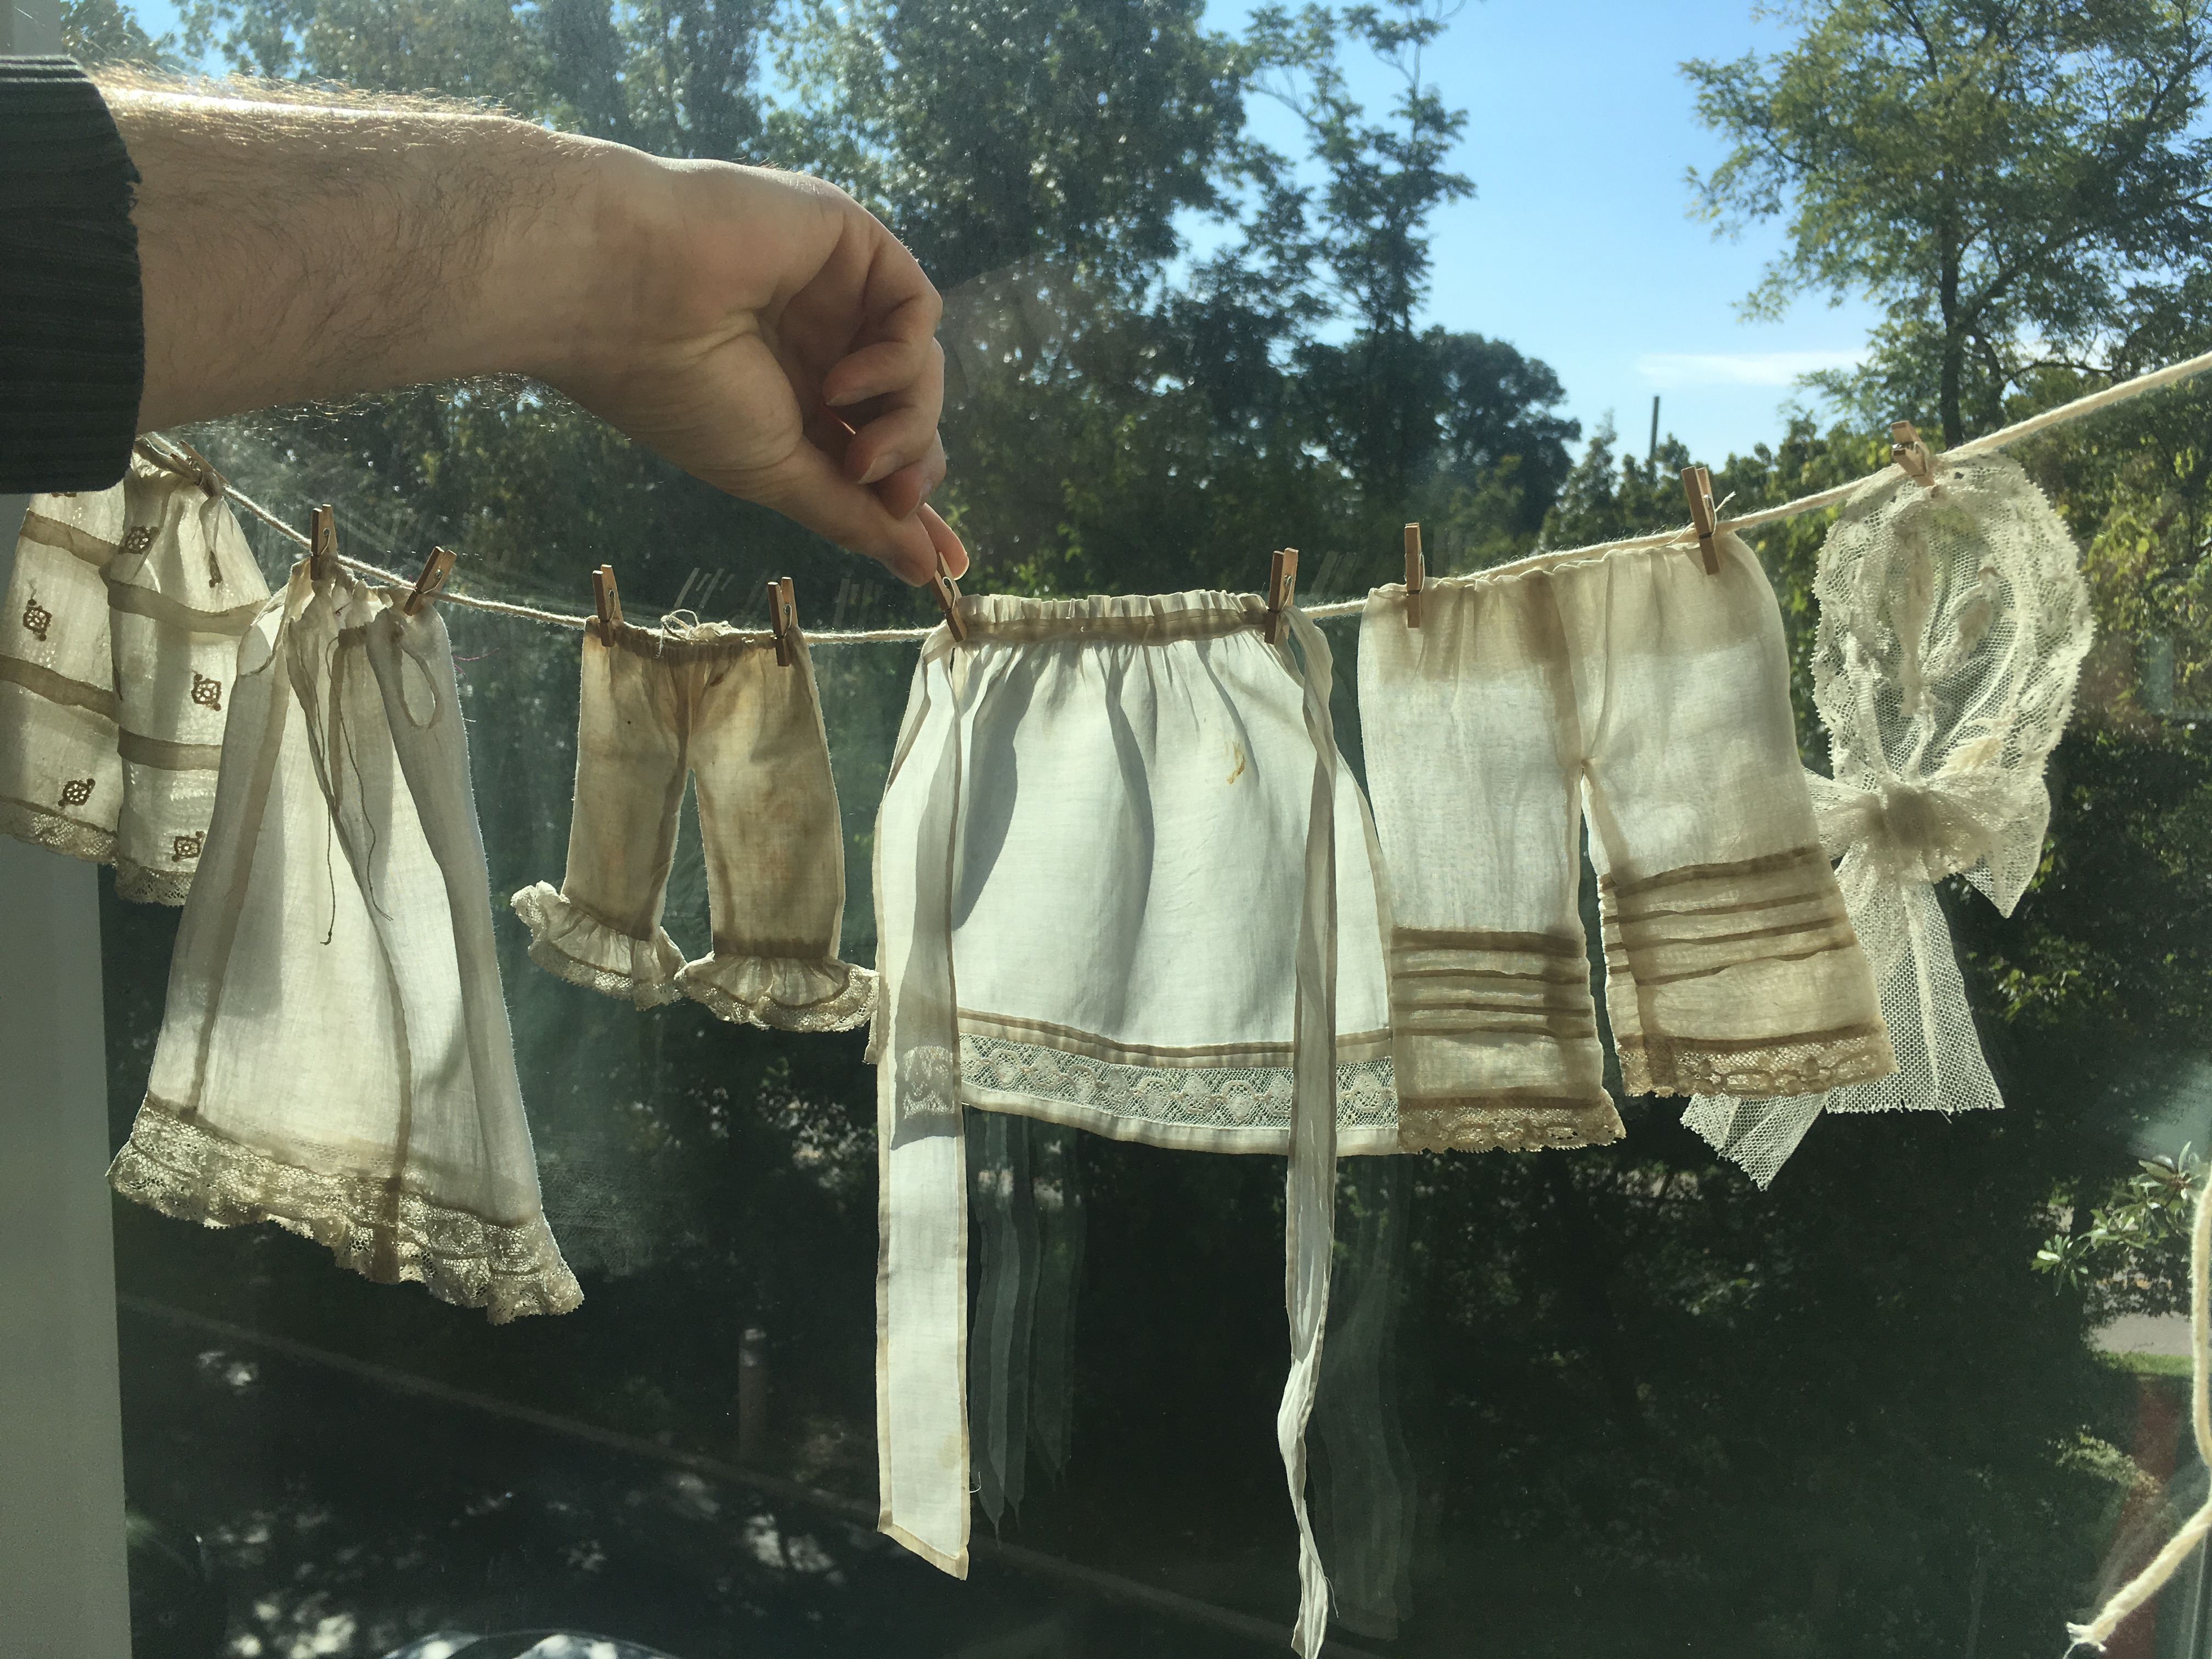 doll clothing on a clothes line